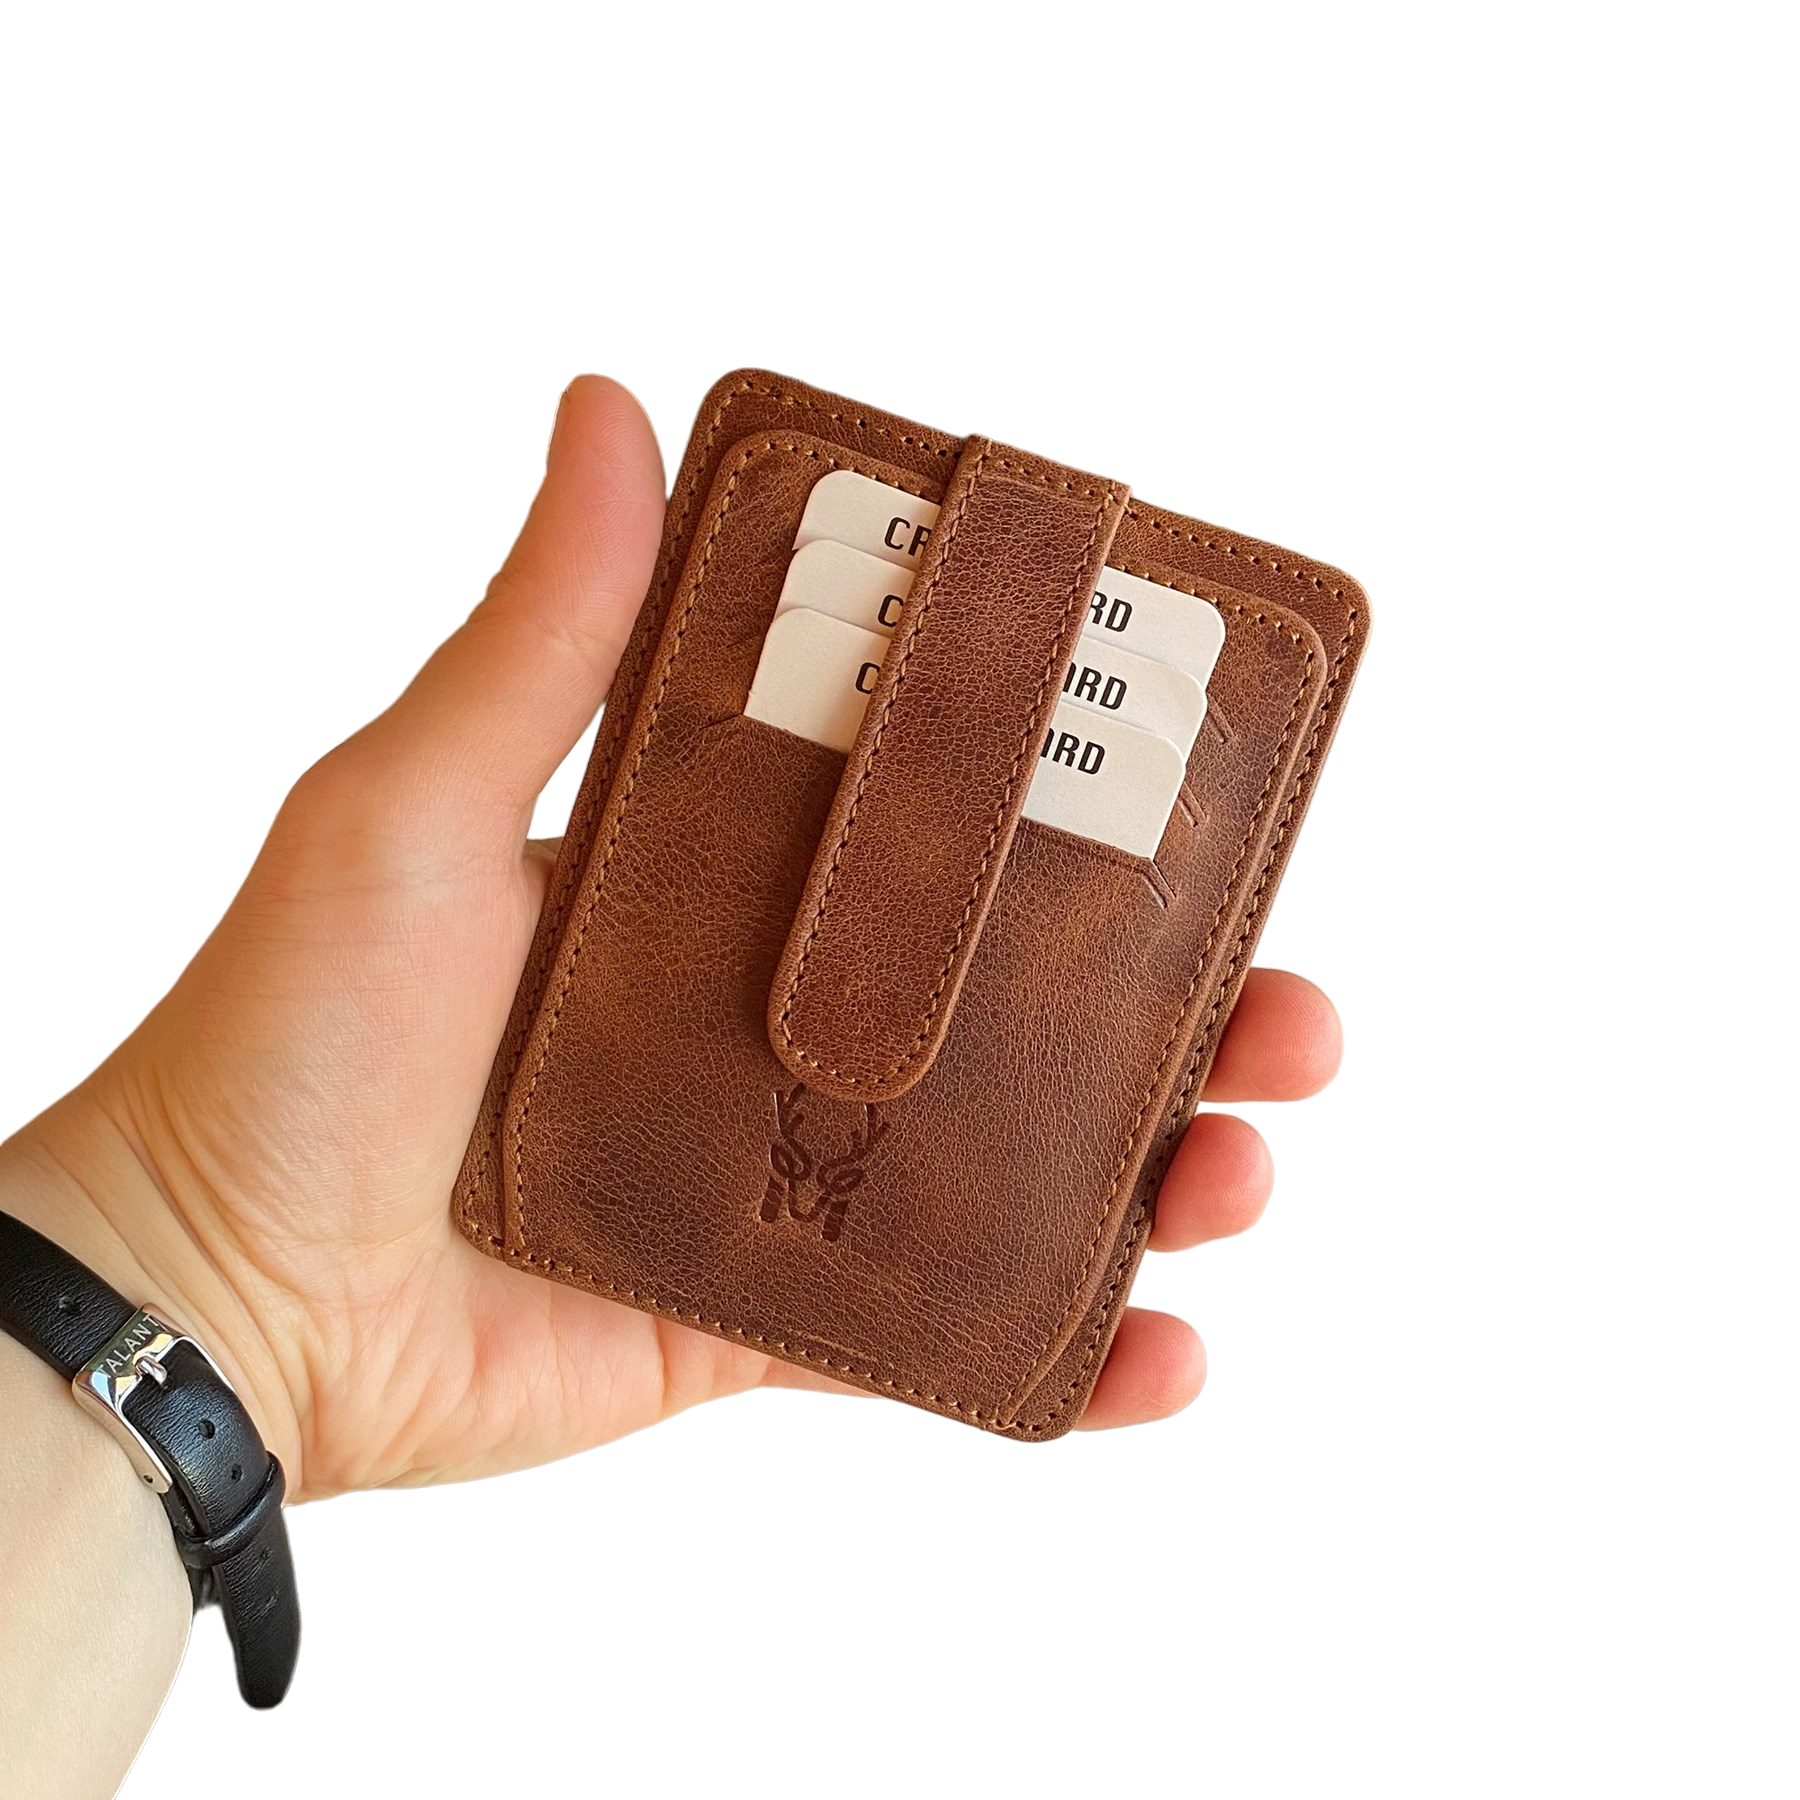 Zona - Genuine Leather Card Holder with ID Windon and Cash Compartment